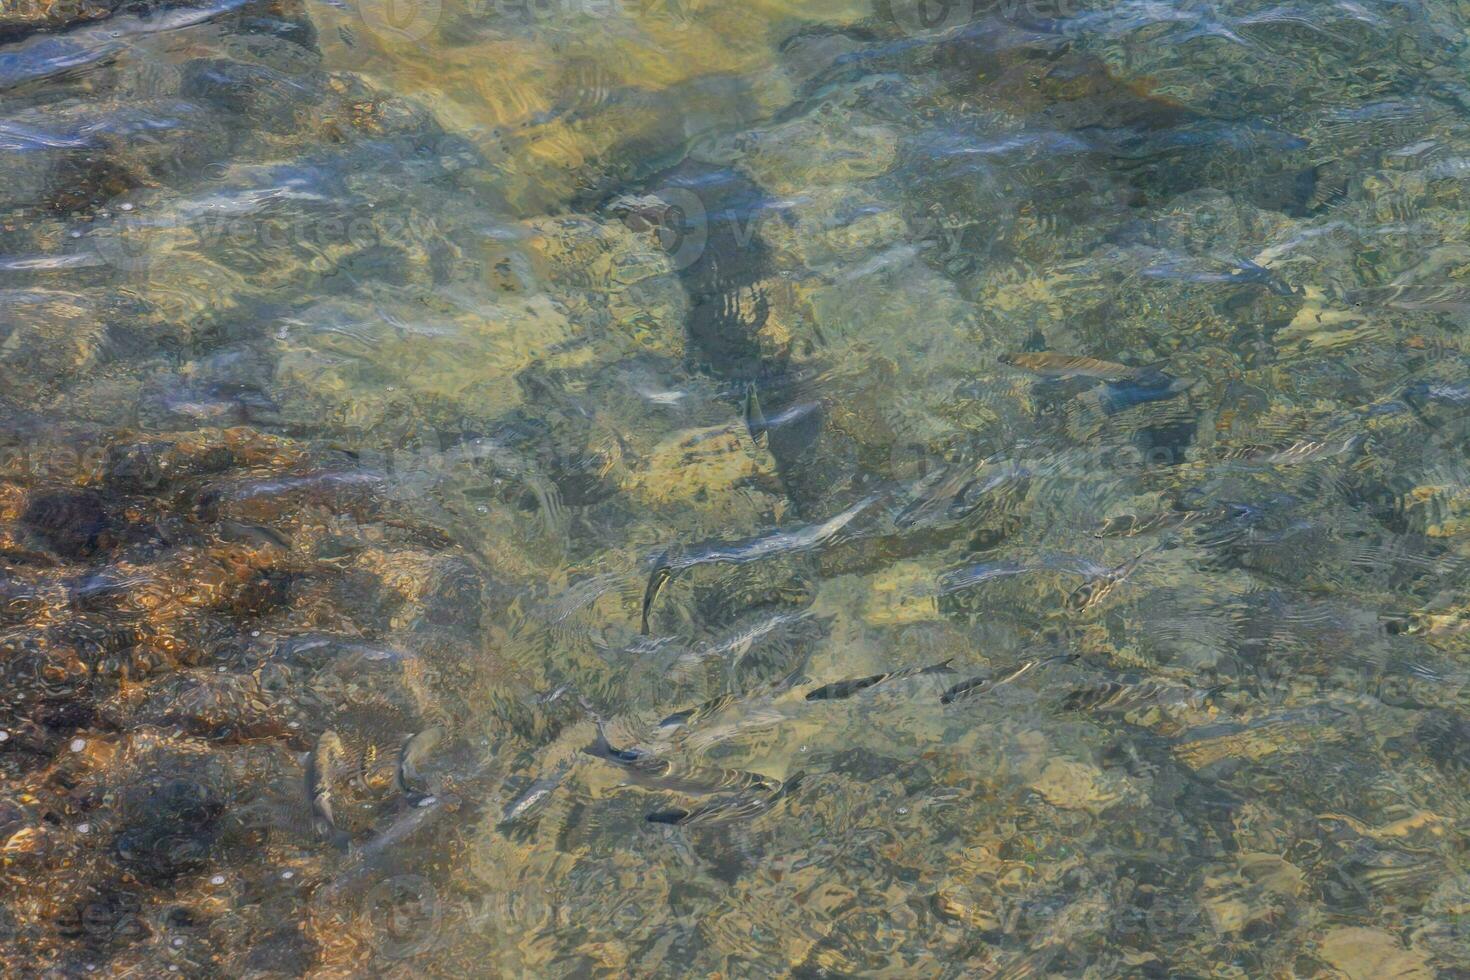 fish swimming in the clear water of a river photo